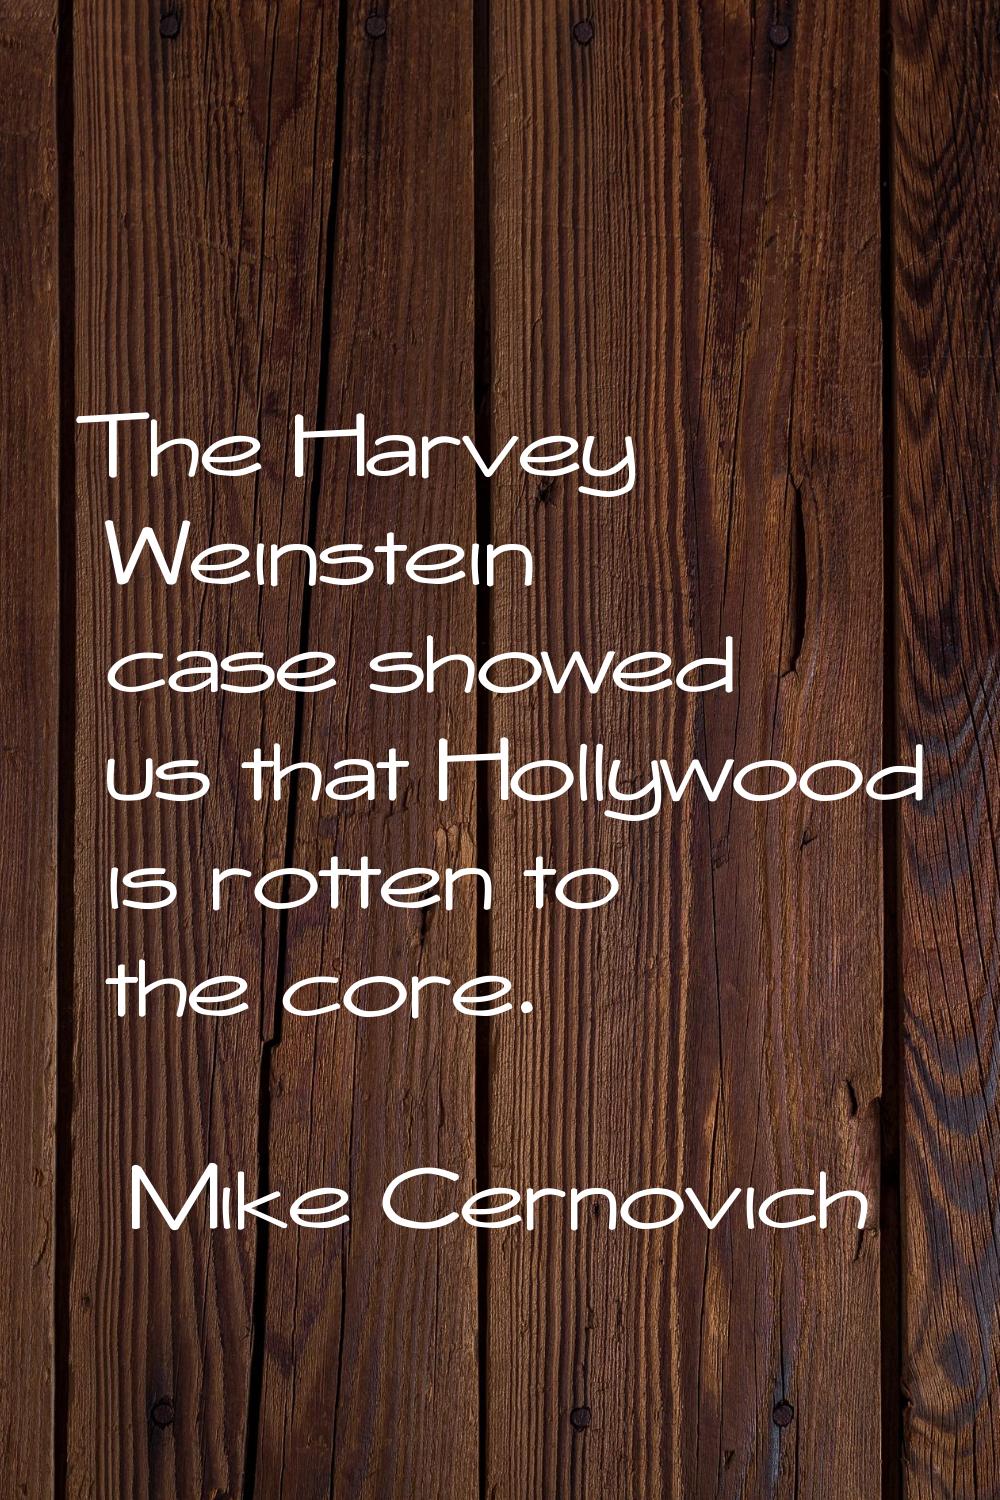 The Harvey Weinstein case showed us that Hollywood is rotten to the core.